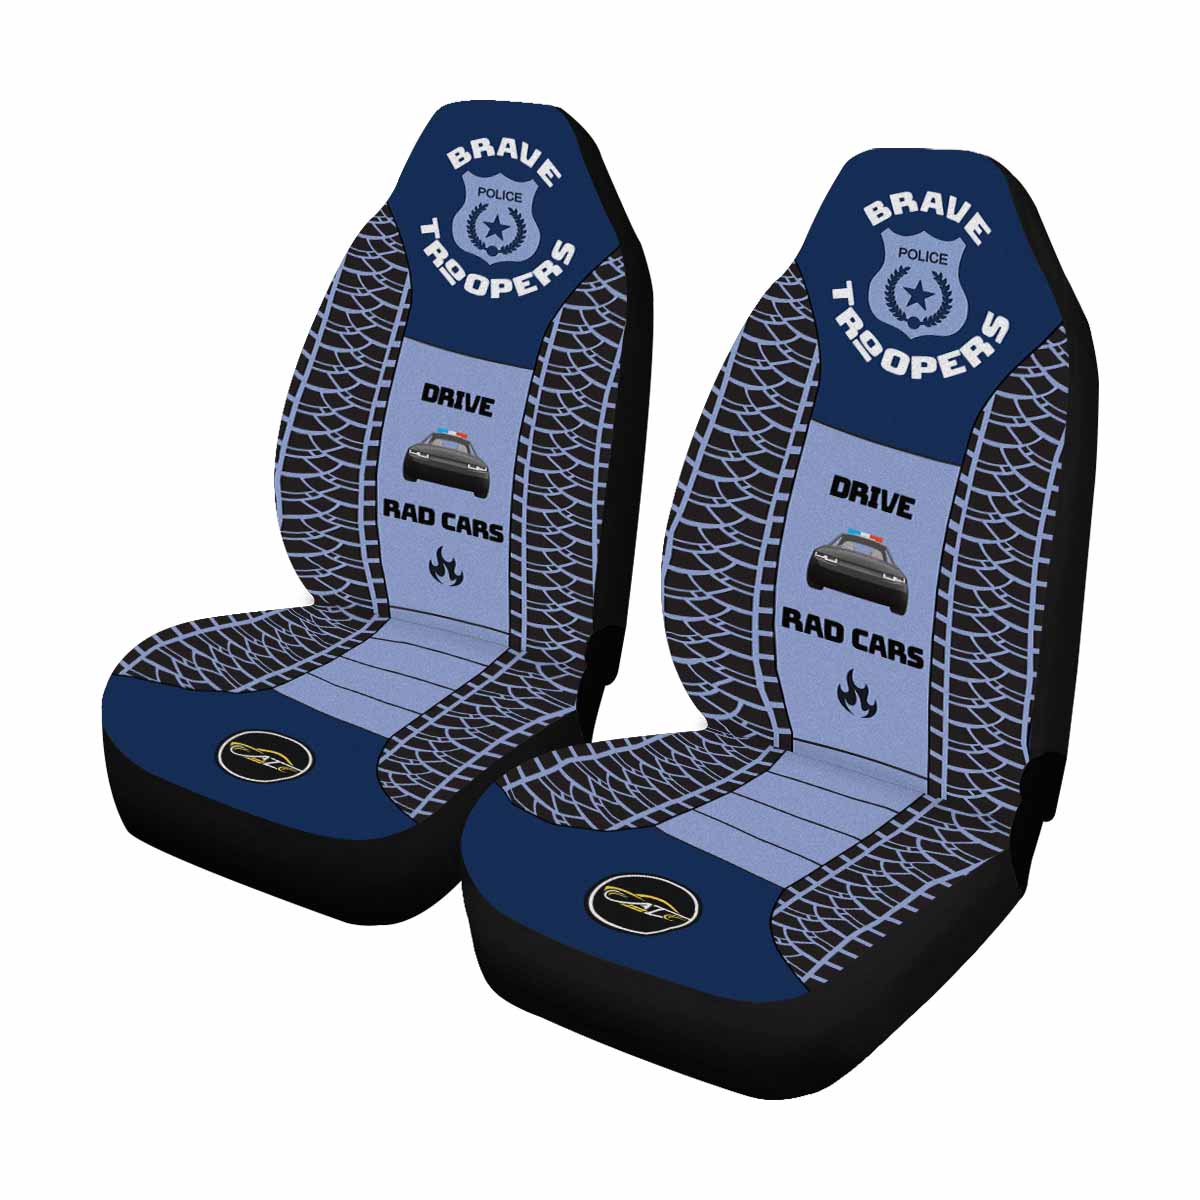 Brave Trooper Policeman Car Seat Covers - Set of 2 Autozendy